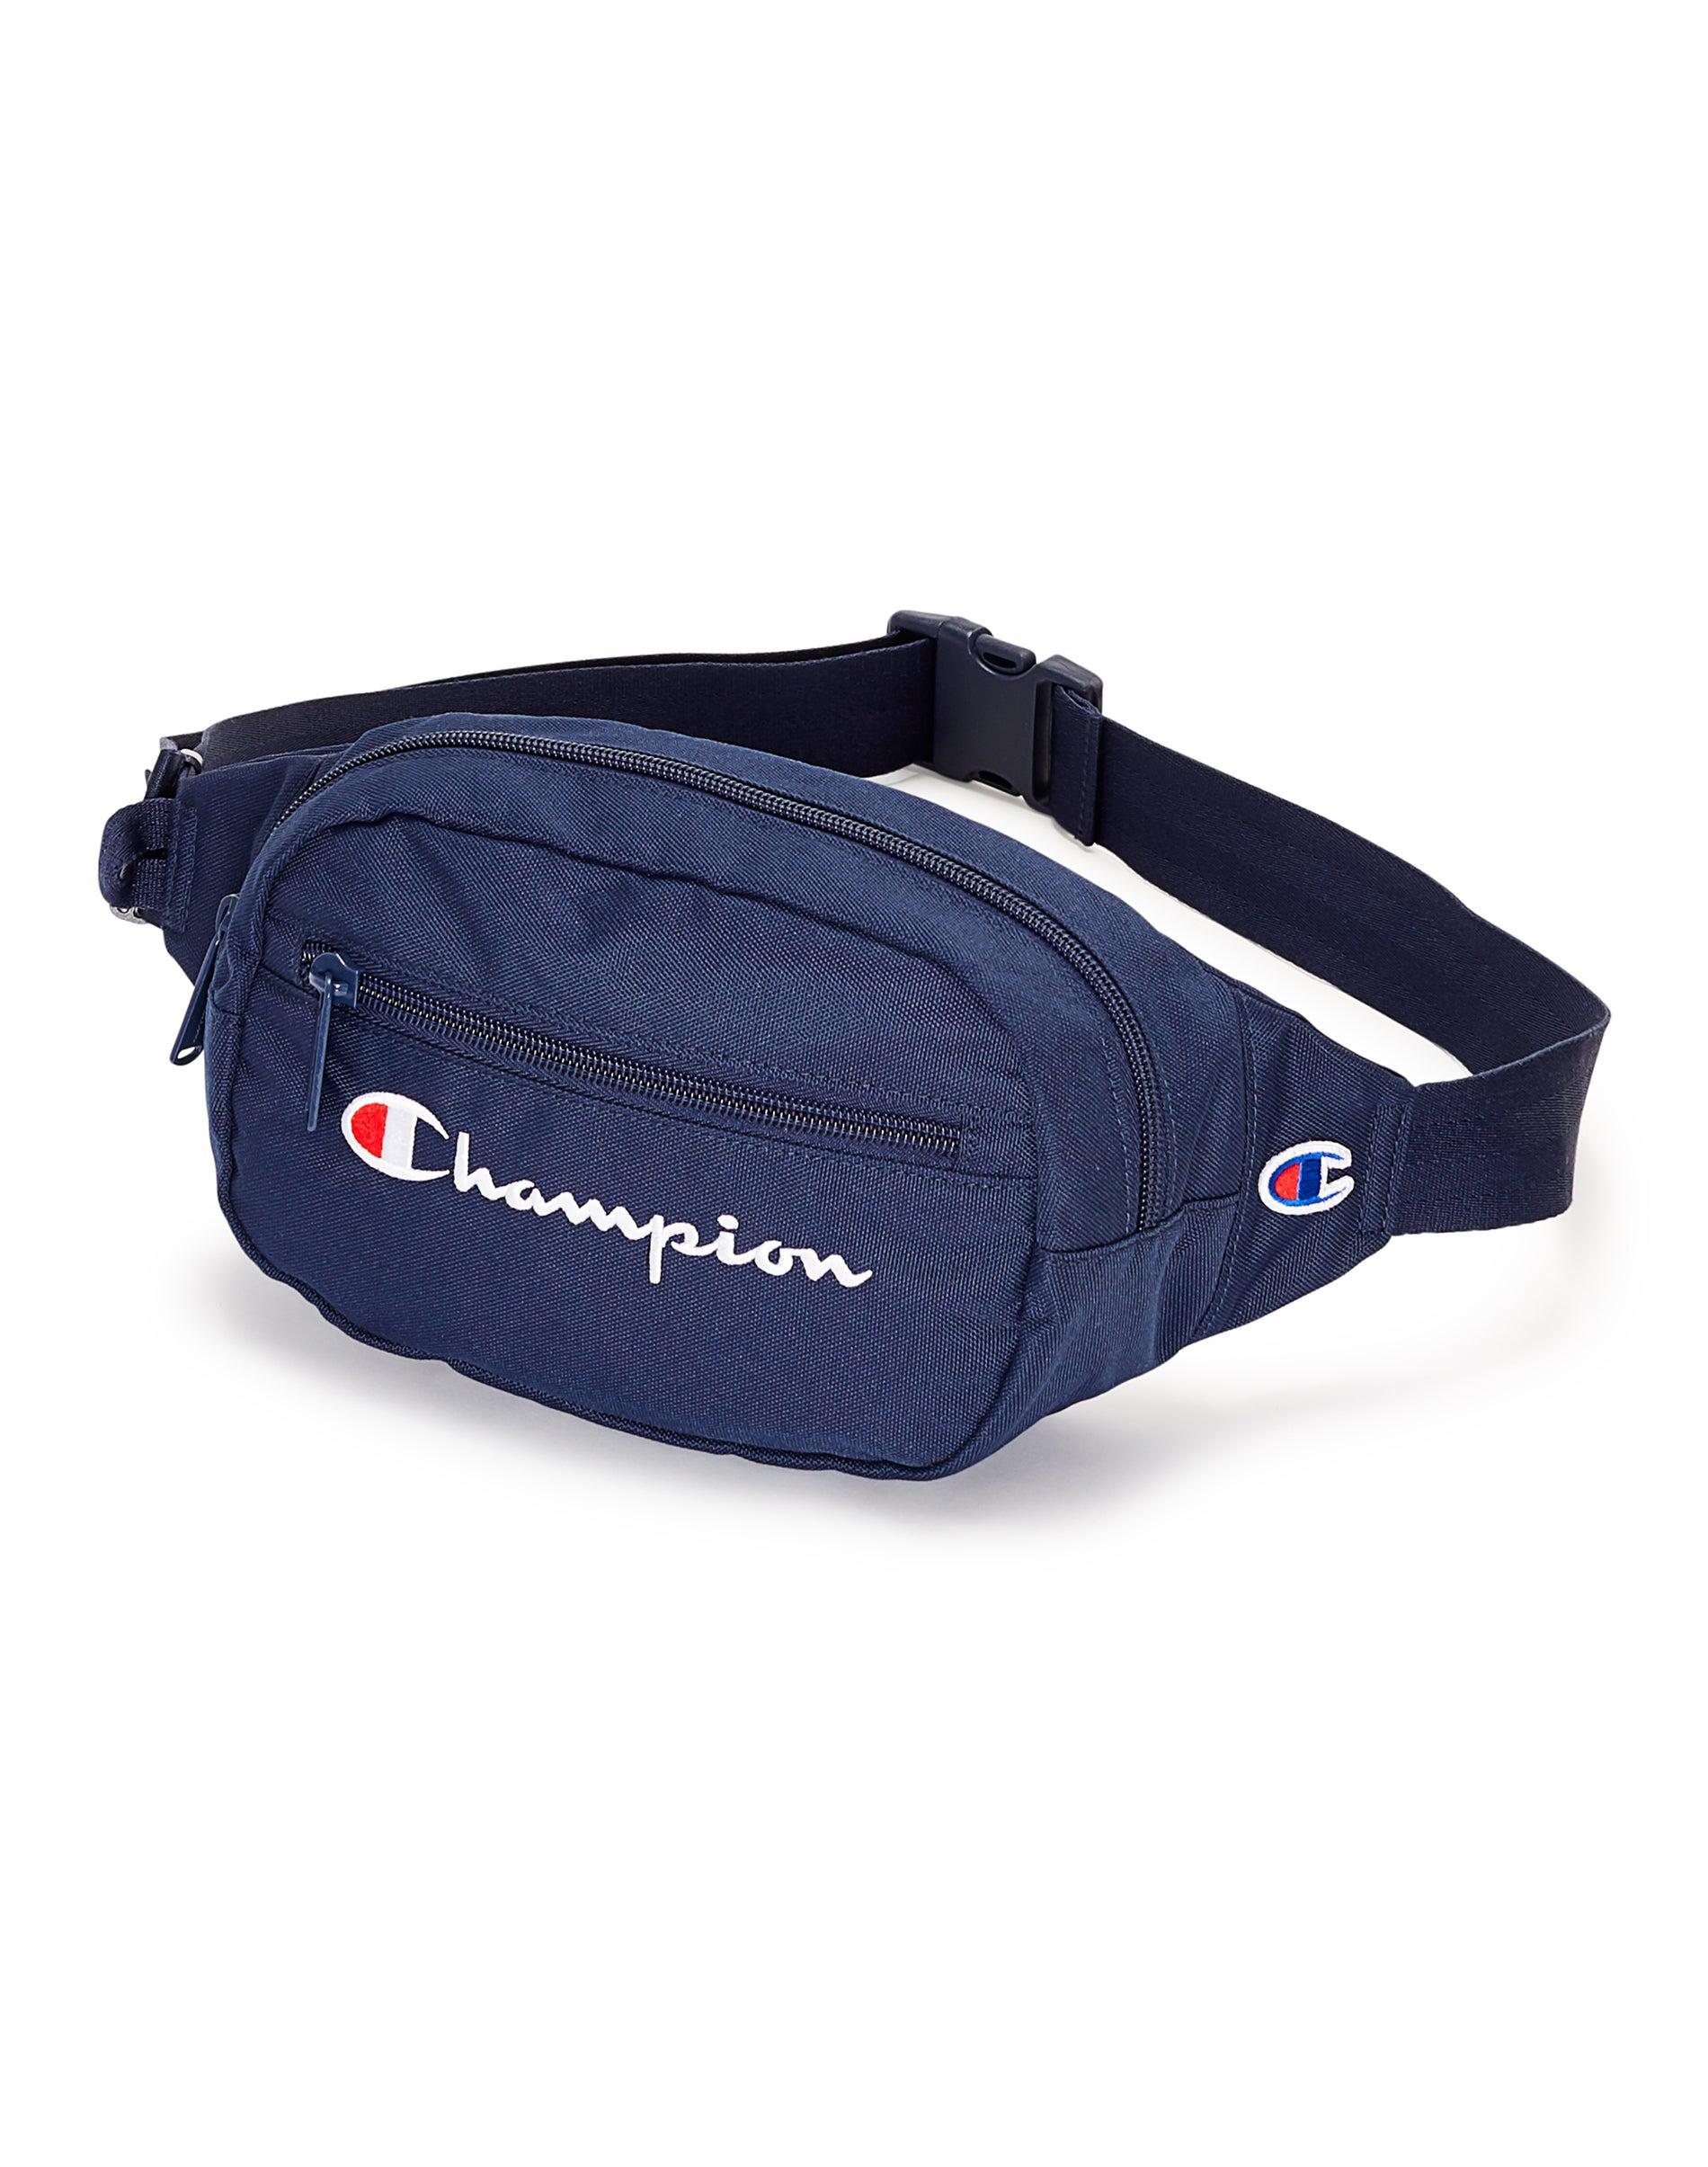 Champion Canvas Life Frequency Waist Pack in Navy (Blue) - Lyst